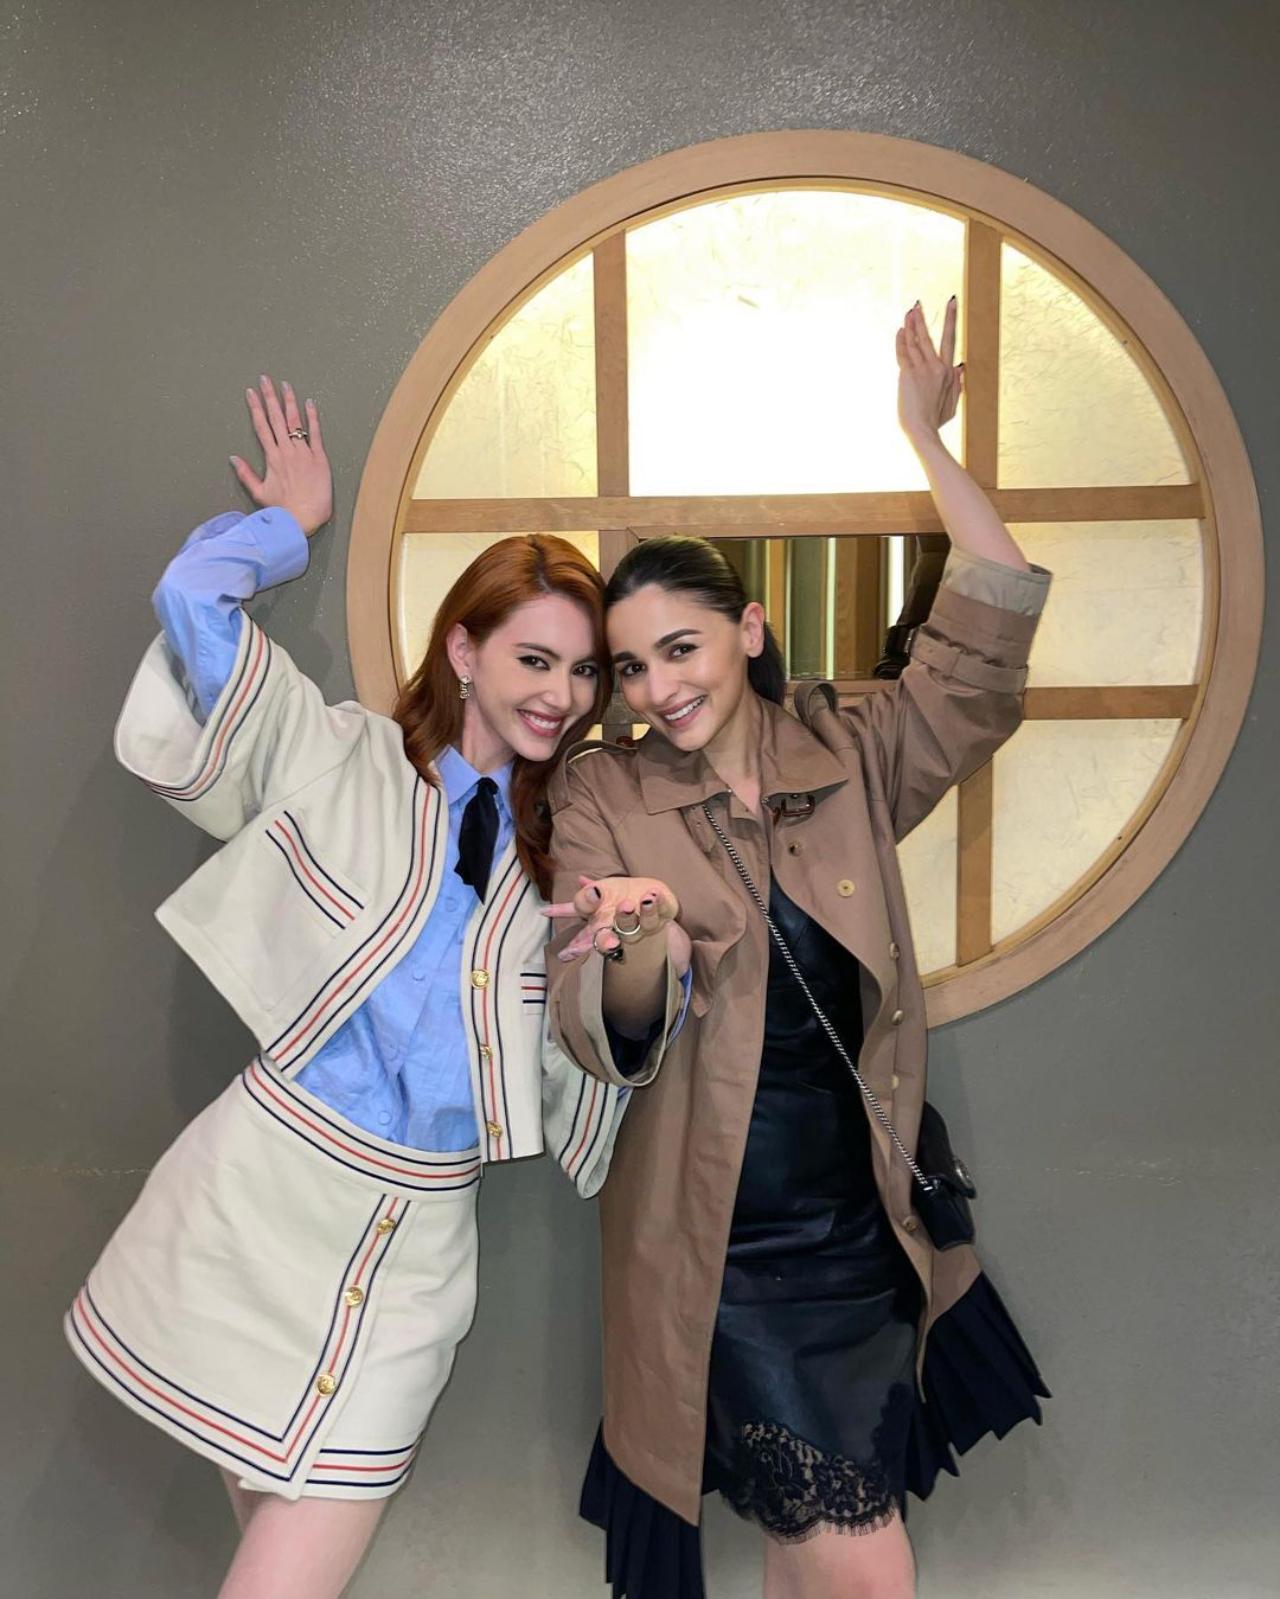 Thai superstar Davikah Hoorne and Alia Bhatt met at the Gucci event in Seoul last week. Davikah took to her Instagram and dropped a couple of adorable pictures where Alia and Davikah can be posing in different styles. Read full story here